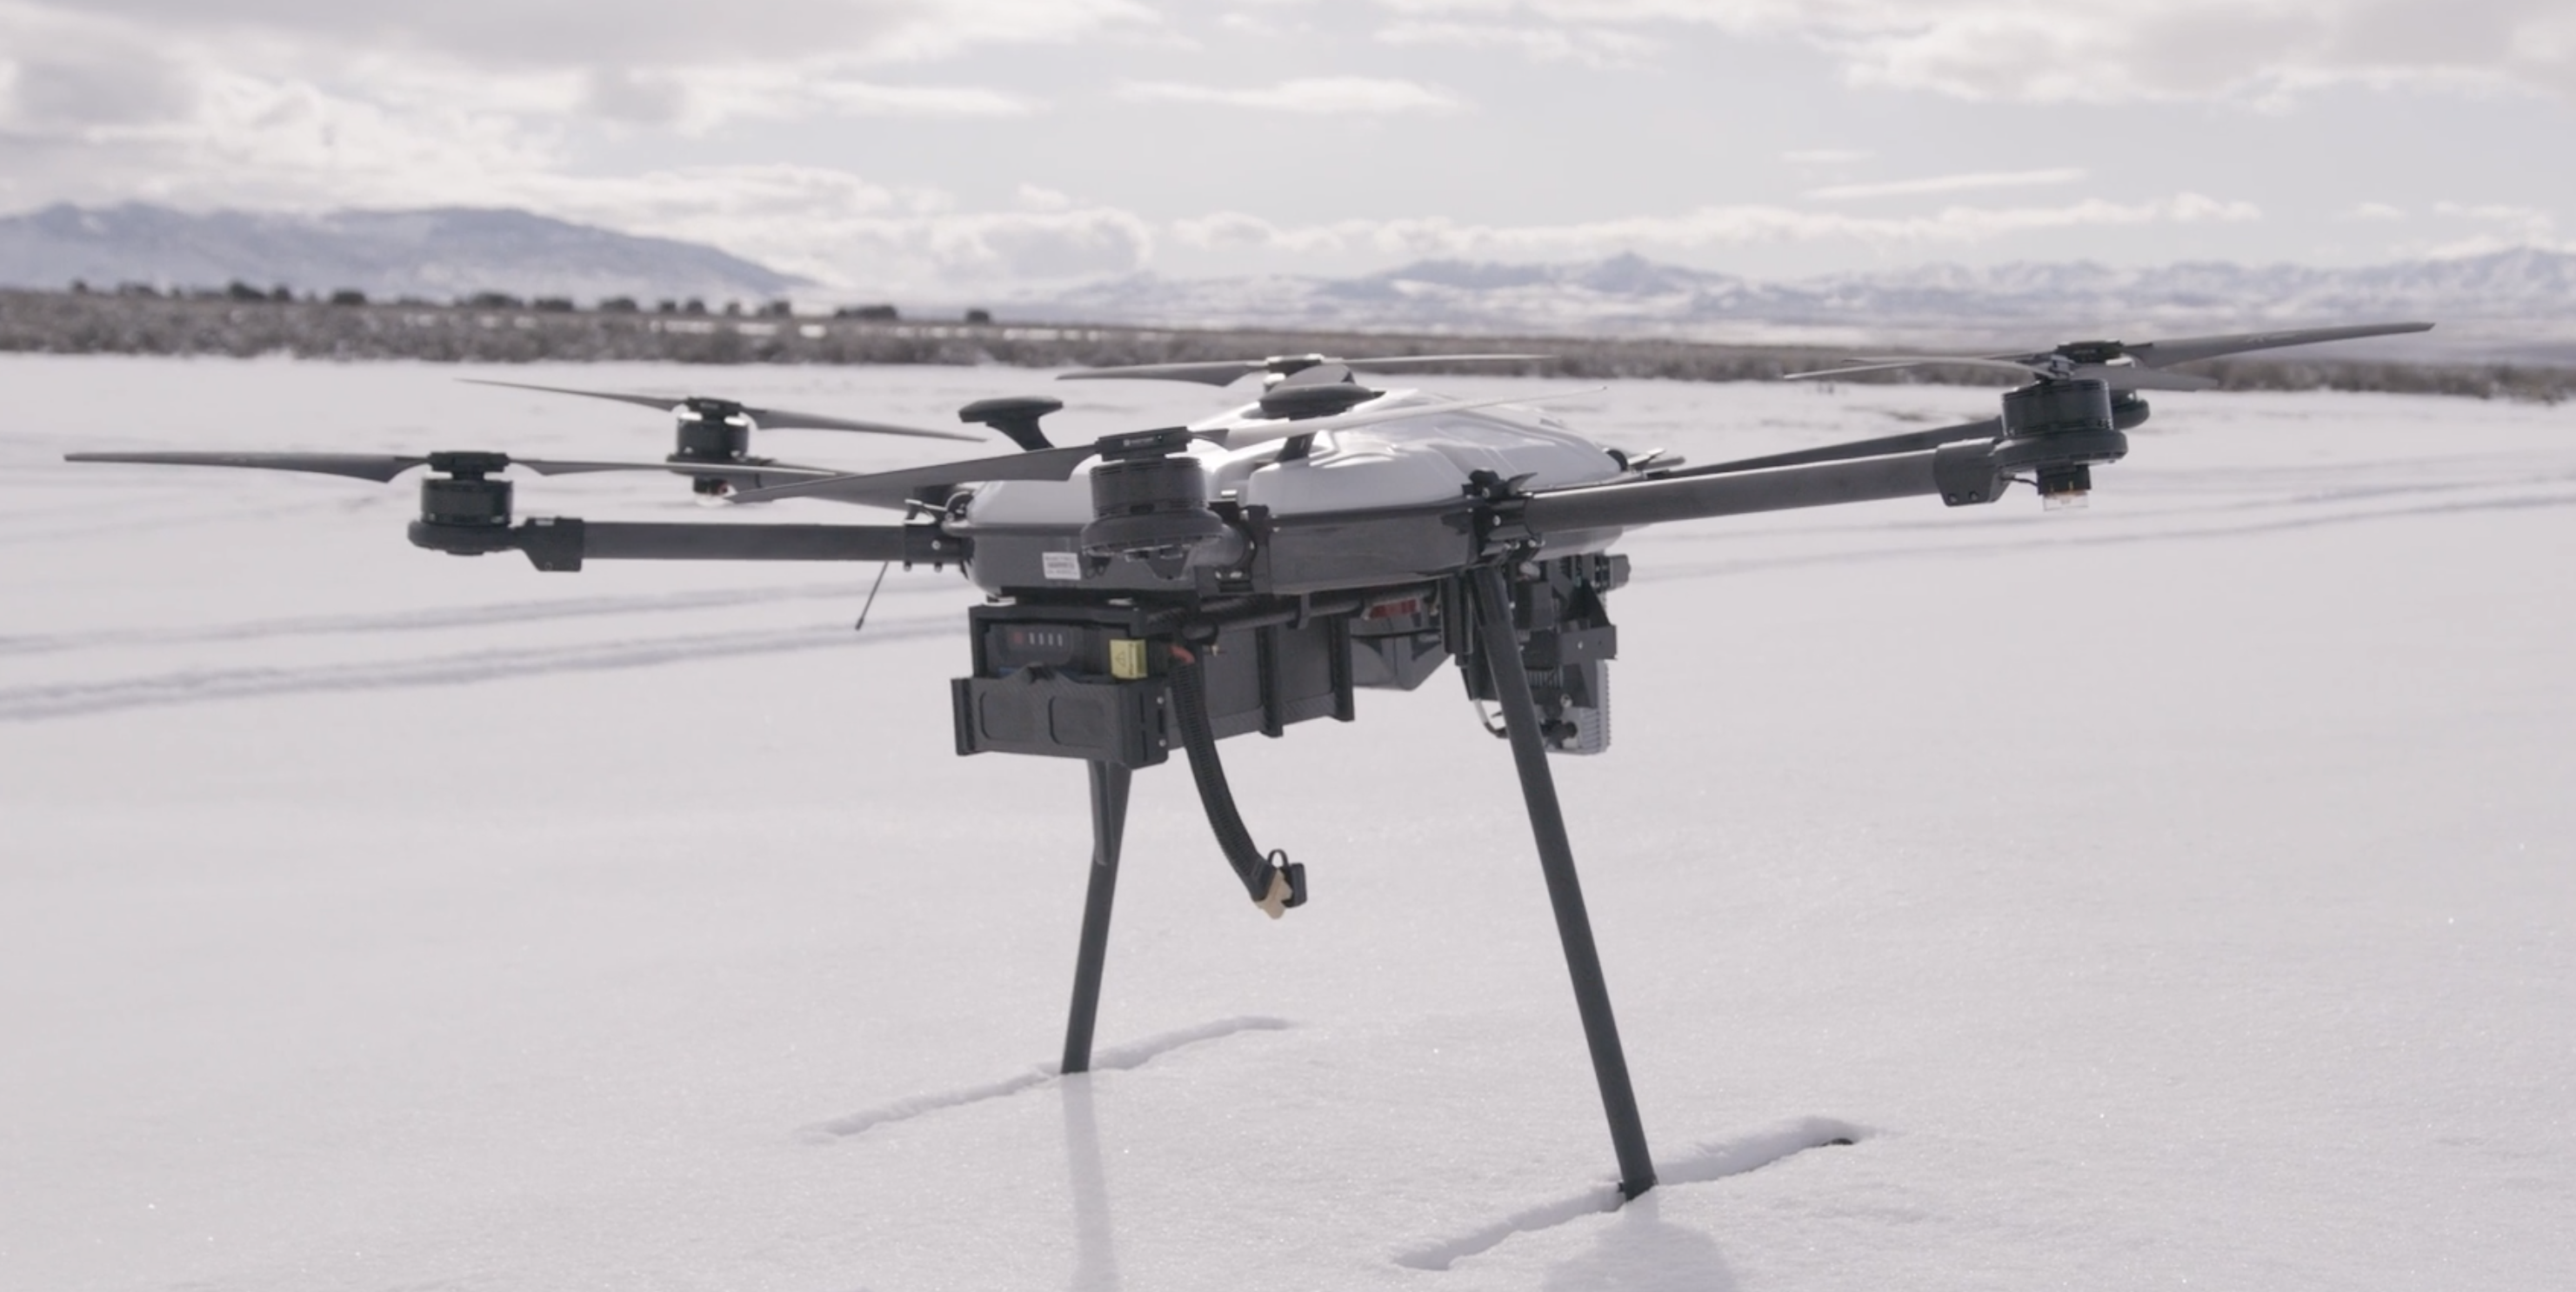 Fortem: How This Innovative Company Is Detecting And Defeating Dangerous Drones